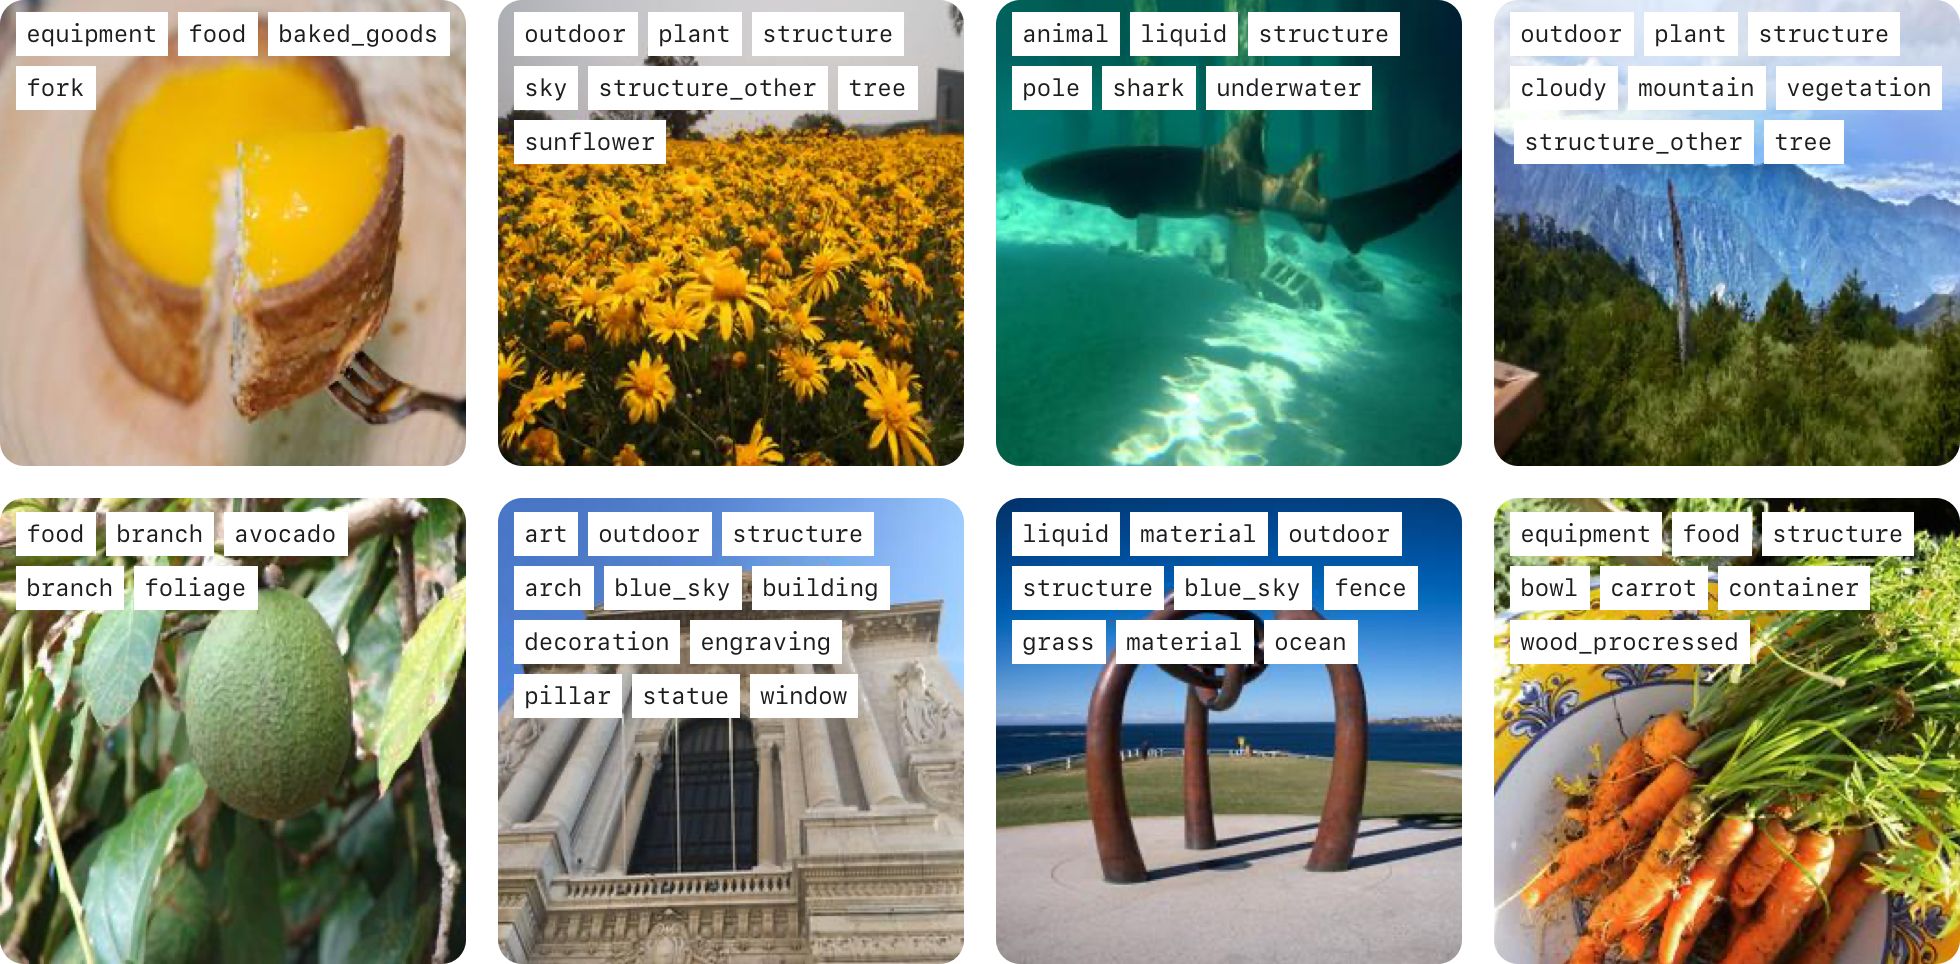 Sample images from the dataset with associated labels.